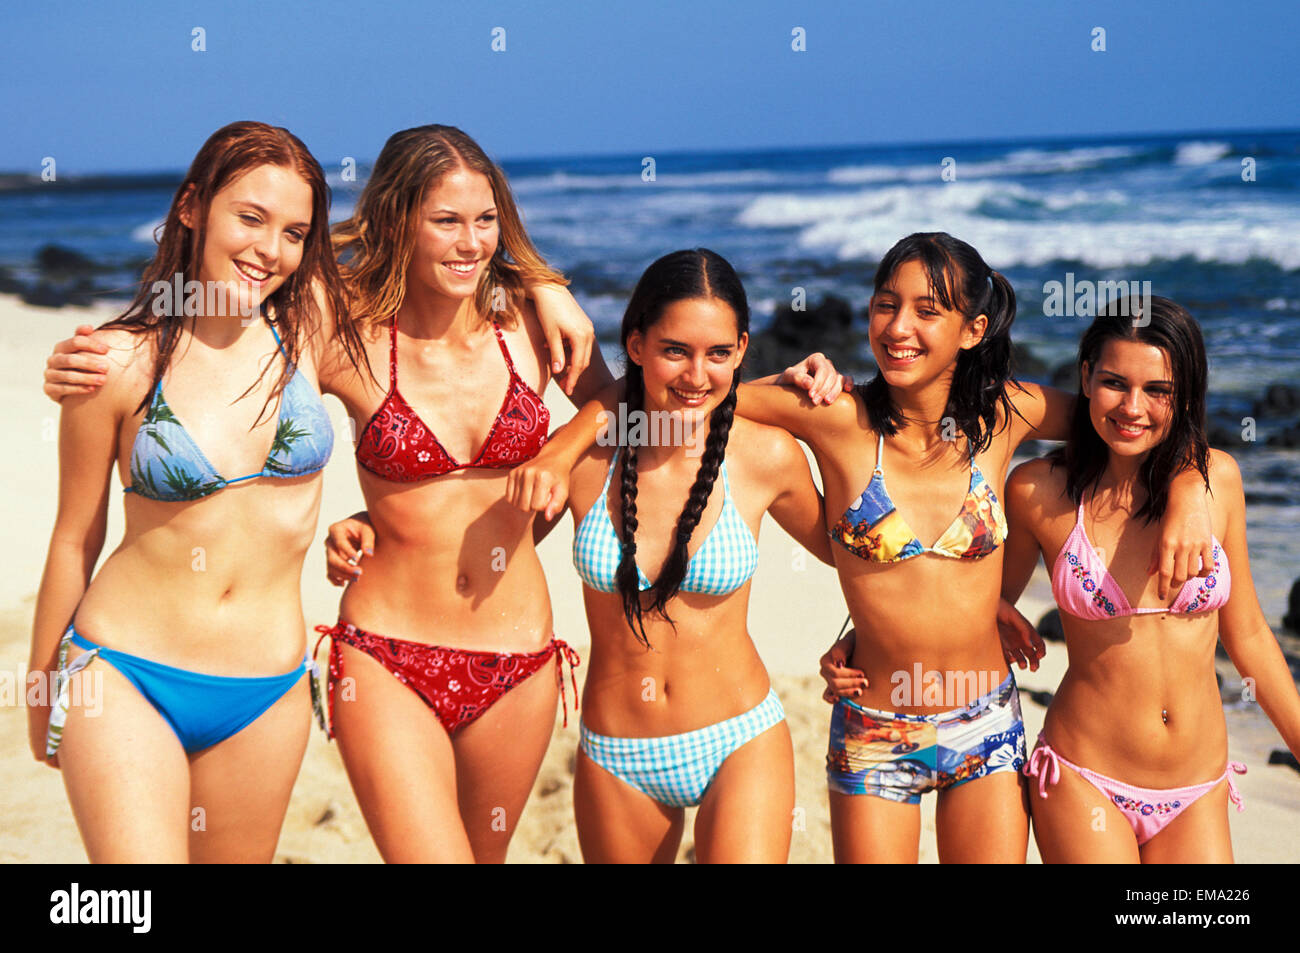 Group of naked women at the beach Teenage Girls Bikini Beach Walking High Resolution Stock Photography And Images Alamy